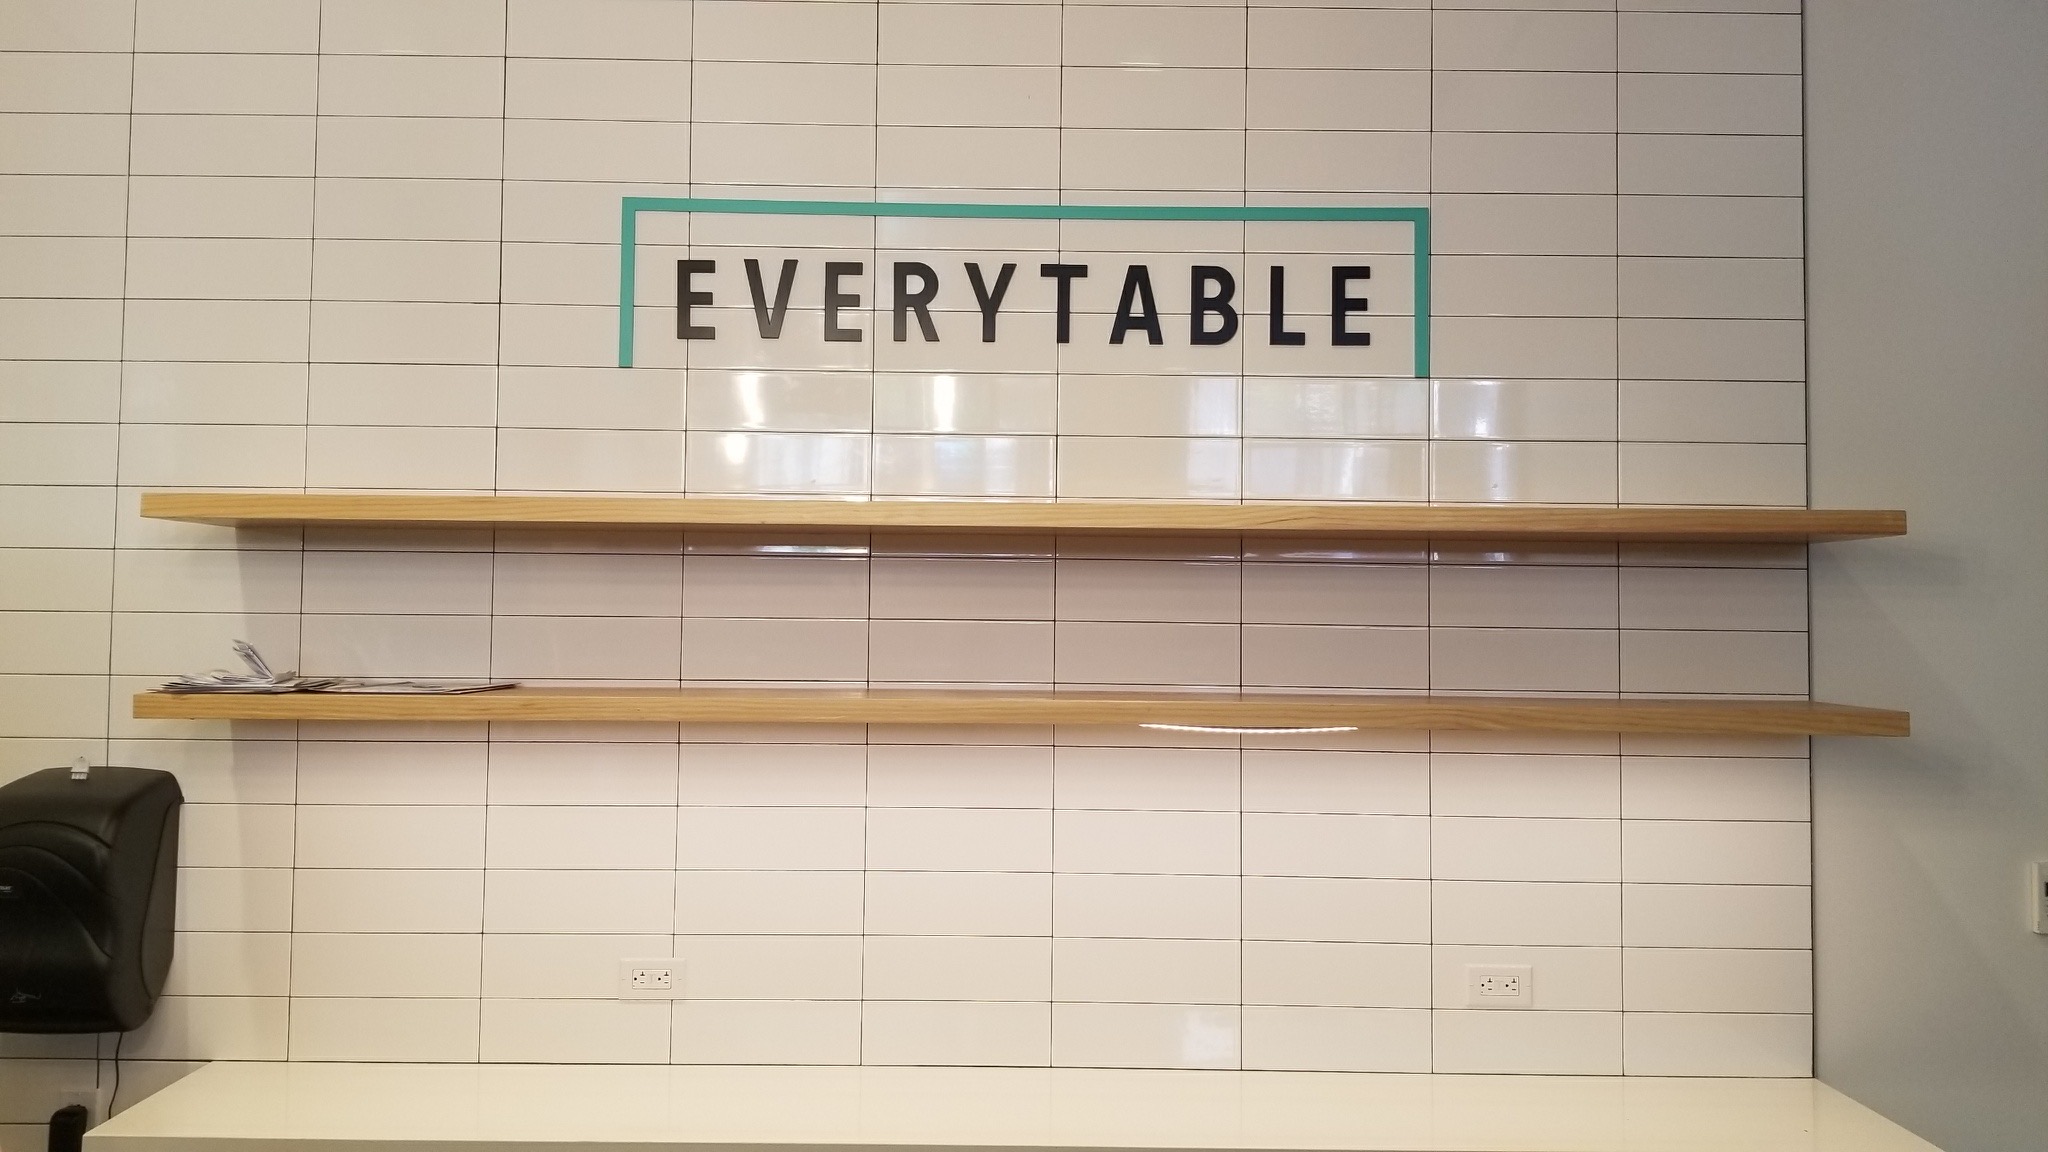 This restaurant lobby sign we made for Amazon in Santa Barbara is for the Everytable eatery that shares the building with them.